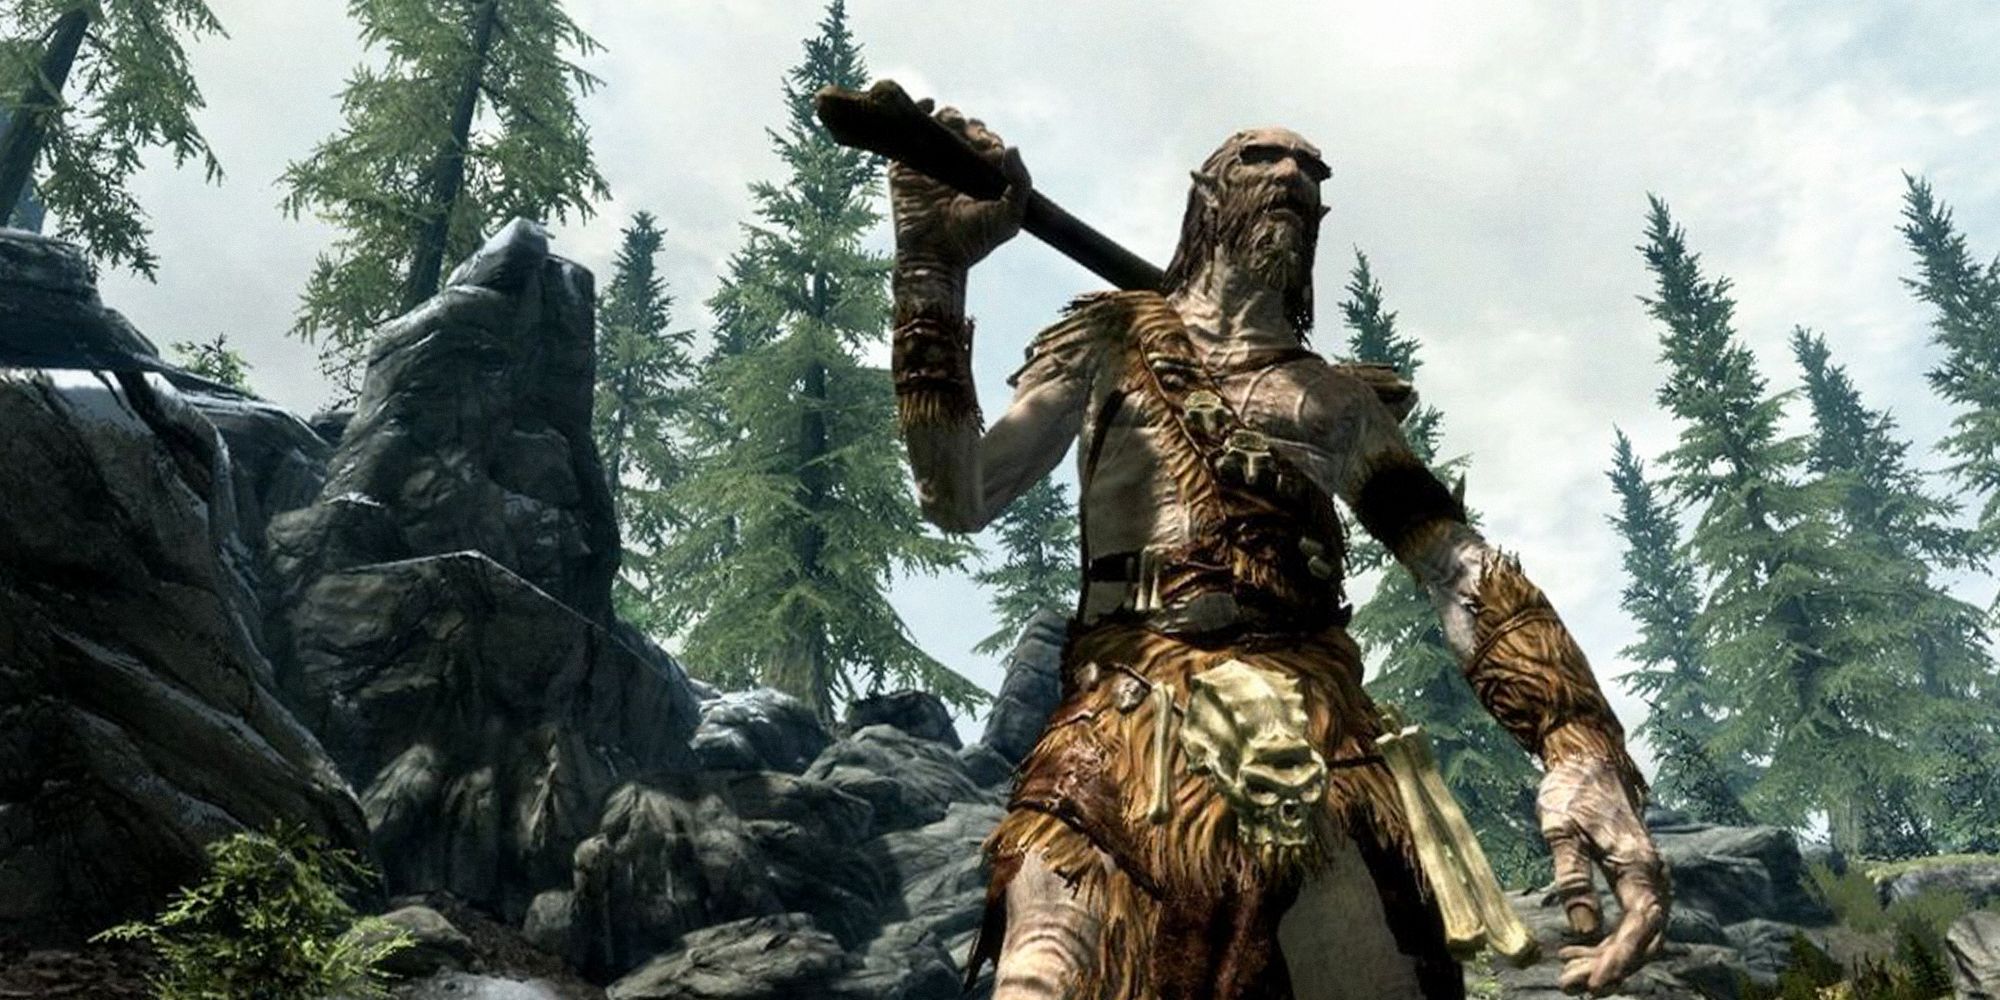 Skyrim giant holding a club over his shoulder, trees in the background.